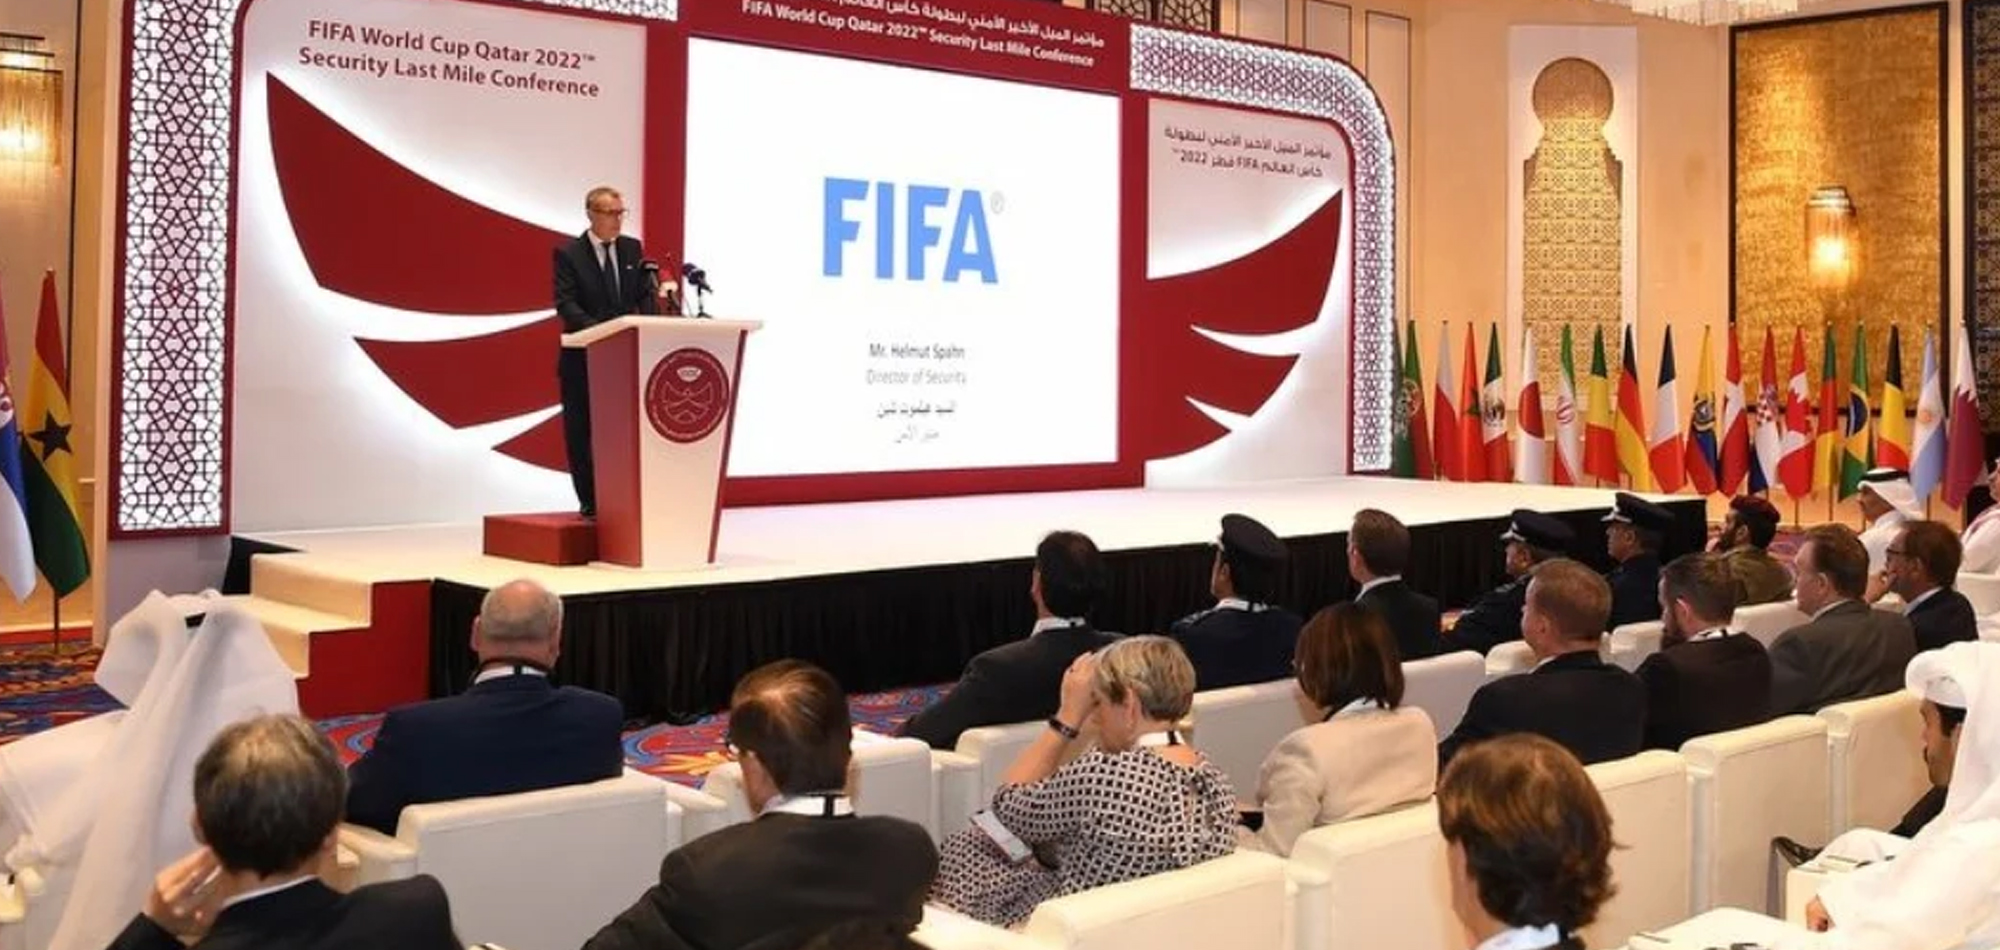 SSOC hosts Security Last-Mile Conference in Doha ahead of FIFA World Cup Qatar 2022™